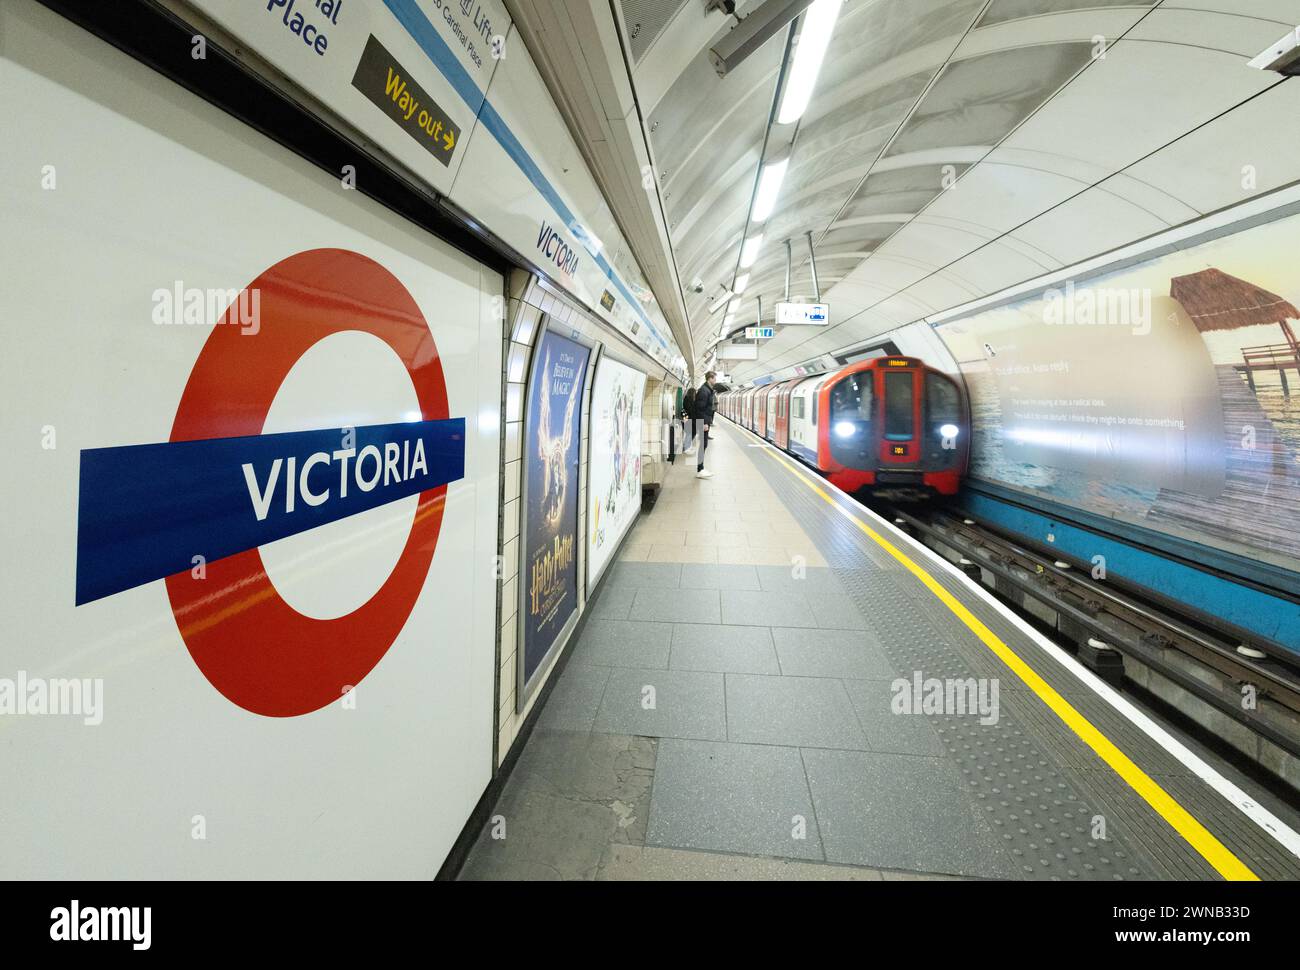 Victoria Underground station London - Victoria Tube station sign, platform and train approaching, public transport for London, London UK Stock Photo